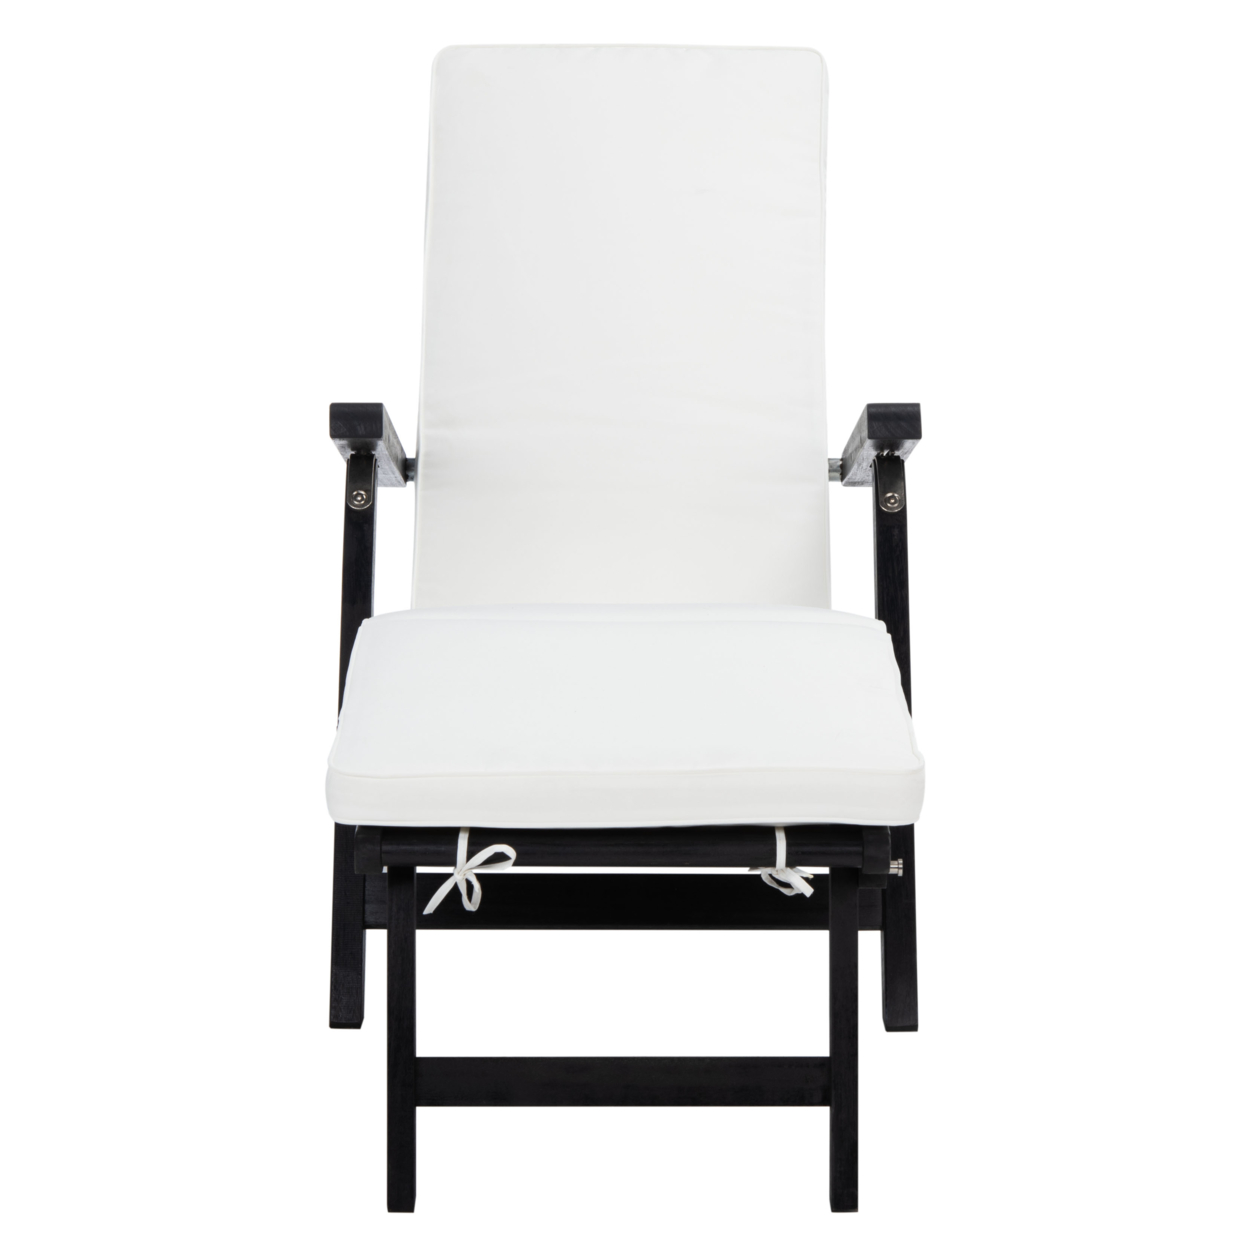 SAFAVIEH Outdoor Collection Palmdale Lounge Chair Black Wood/Beige Cushion